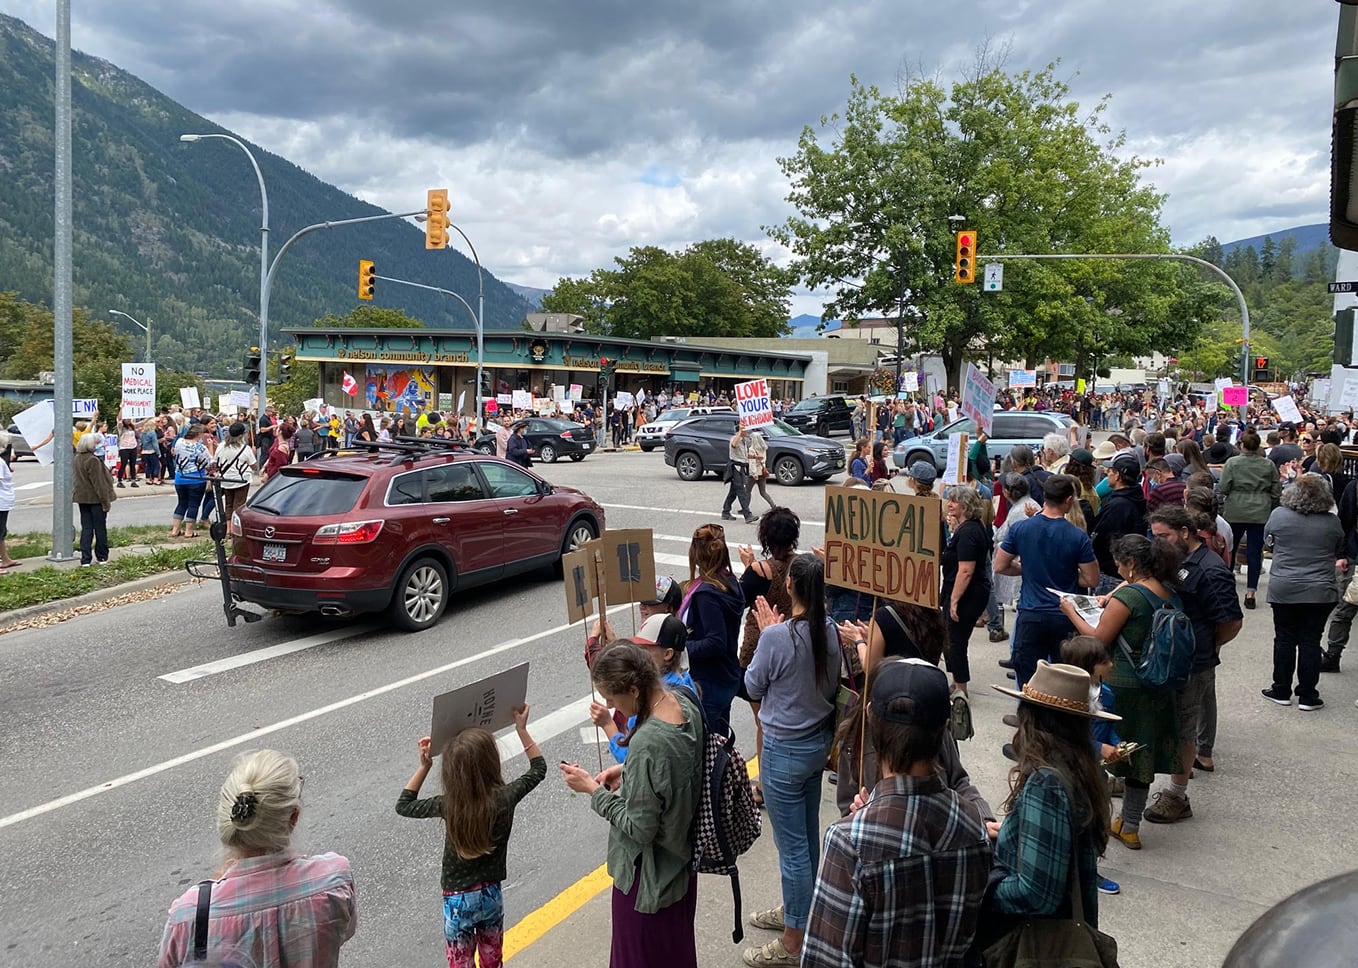 Opposition to mandatory vaccination rally draws huge crowd in Nelson